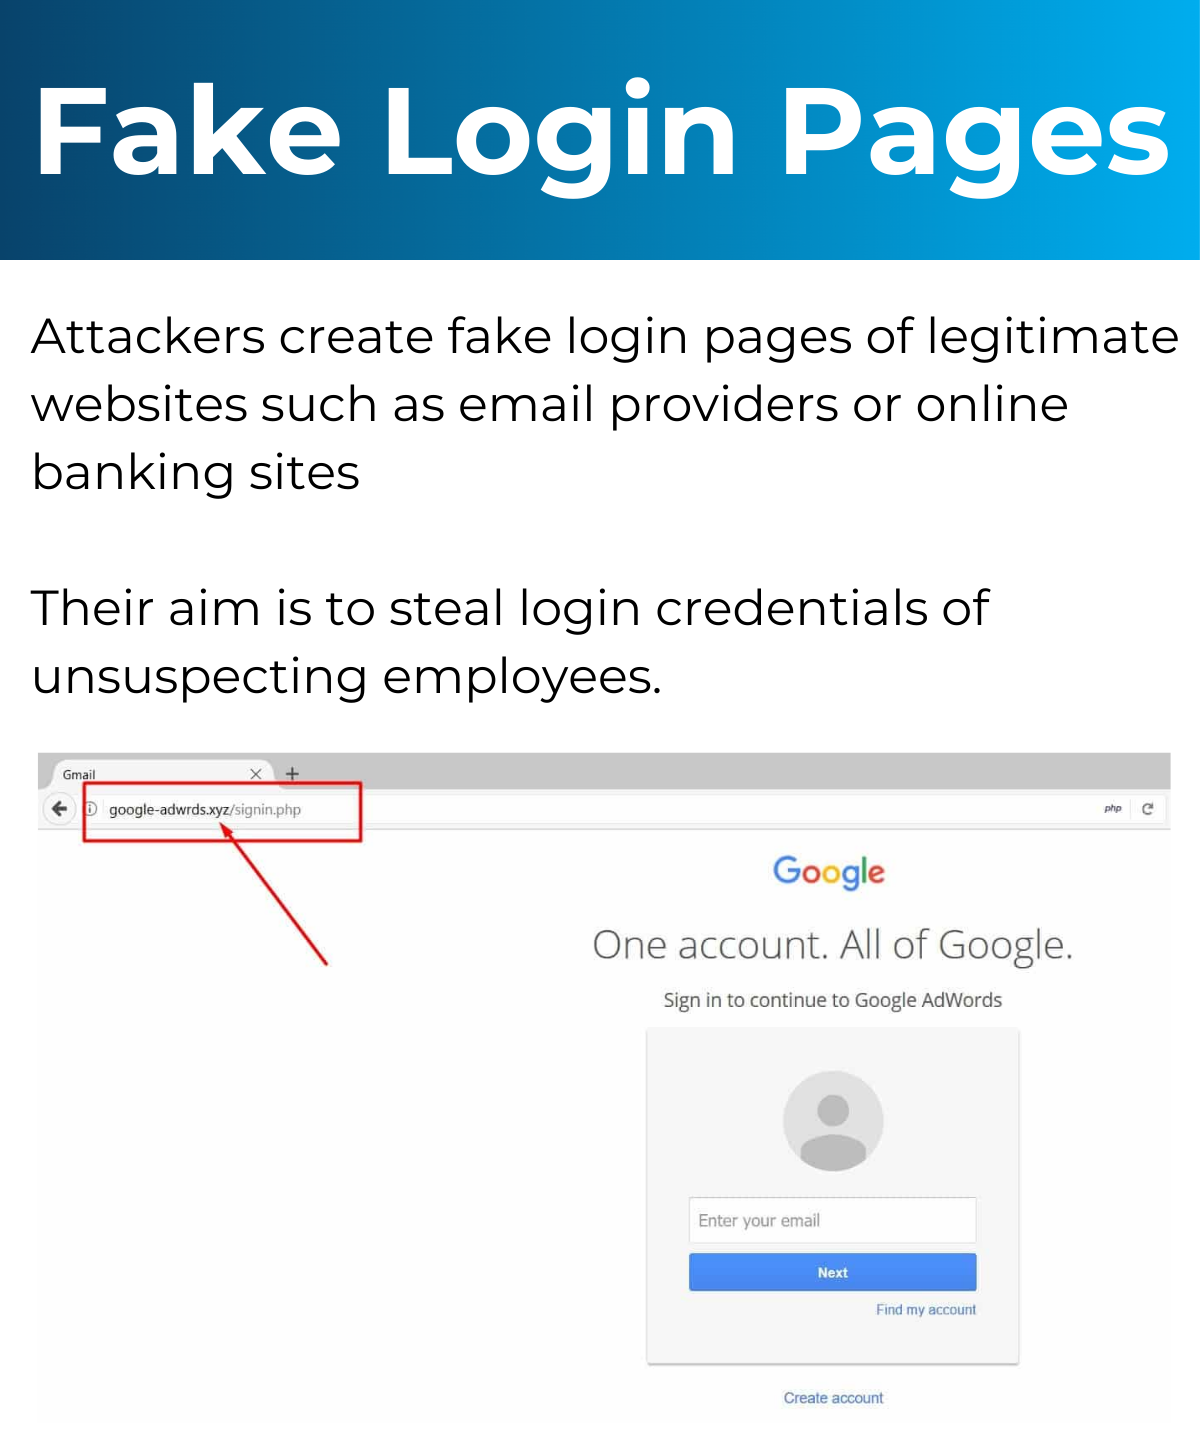 Fake Log In Pages